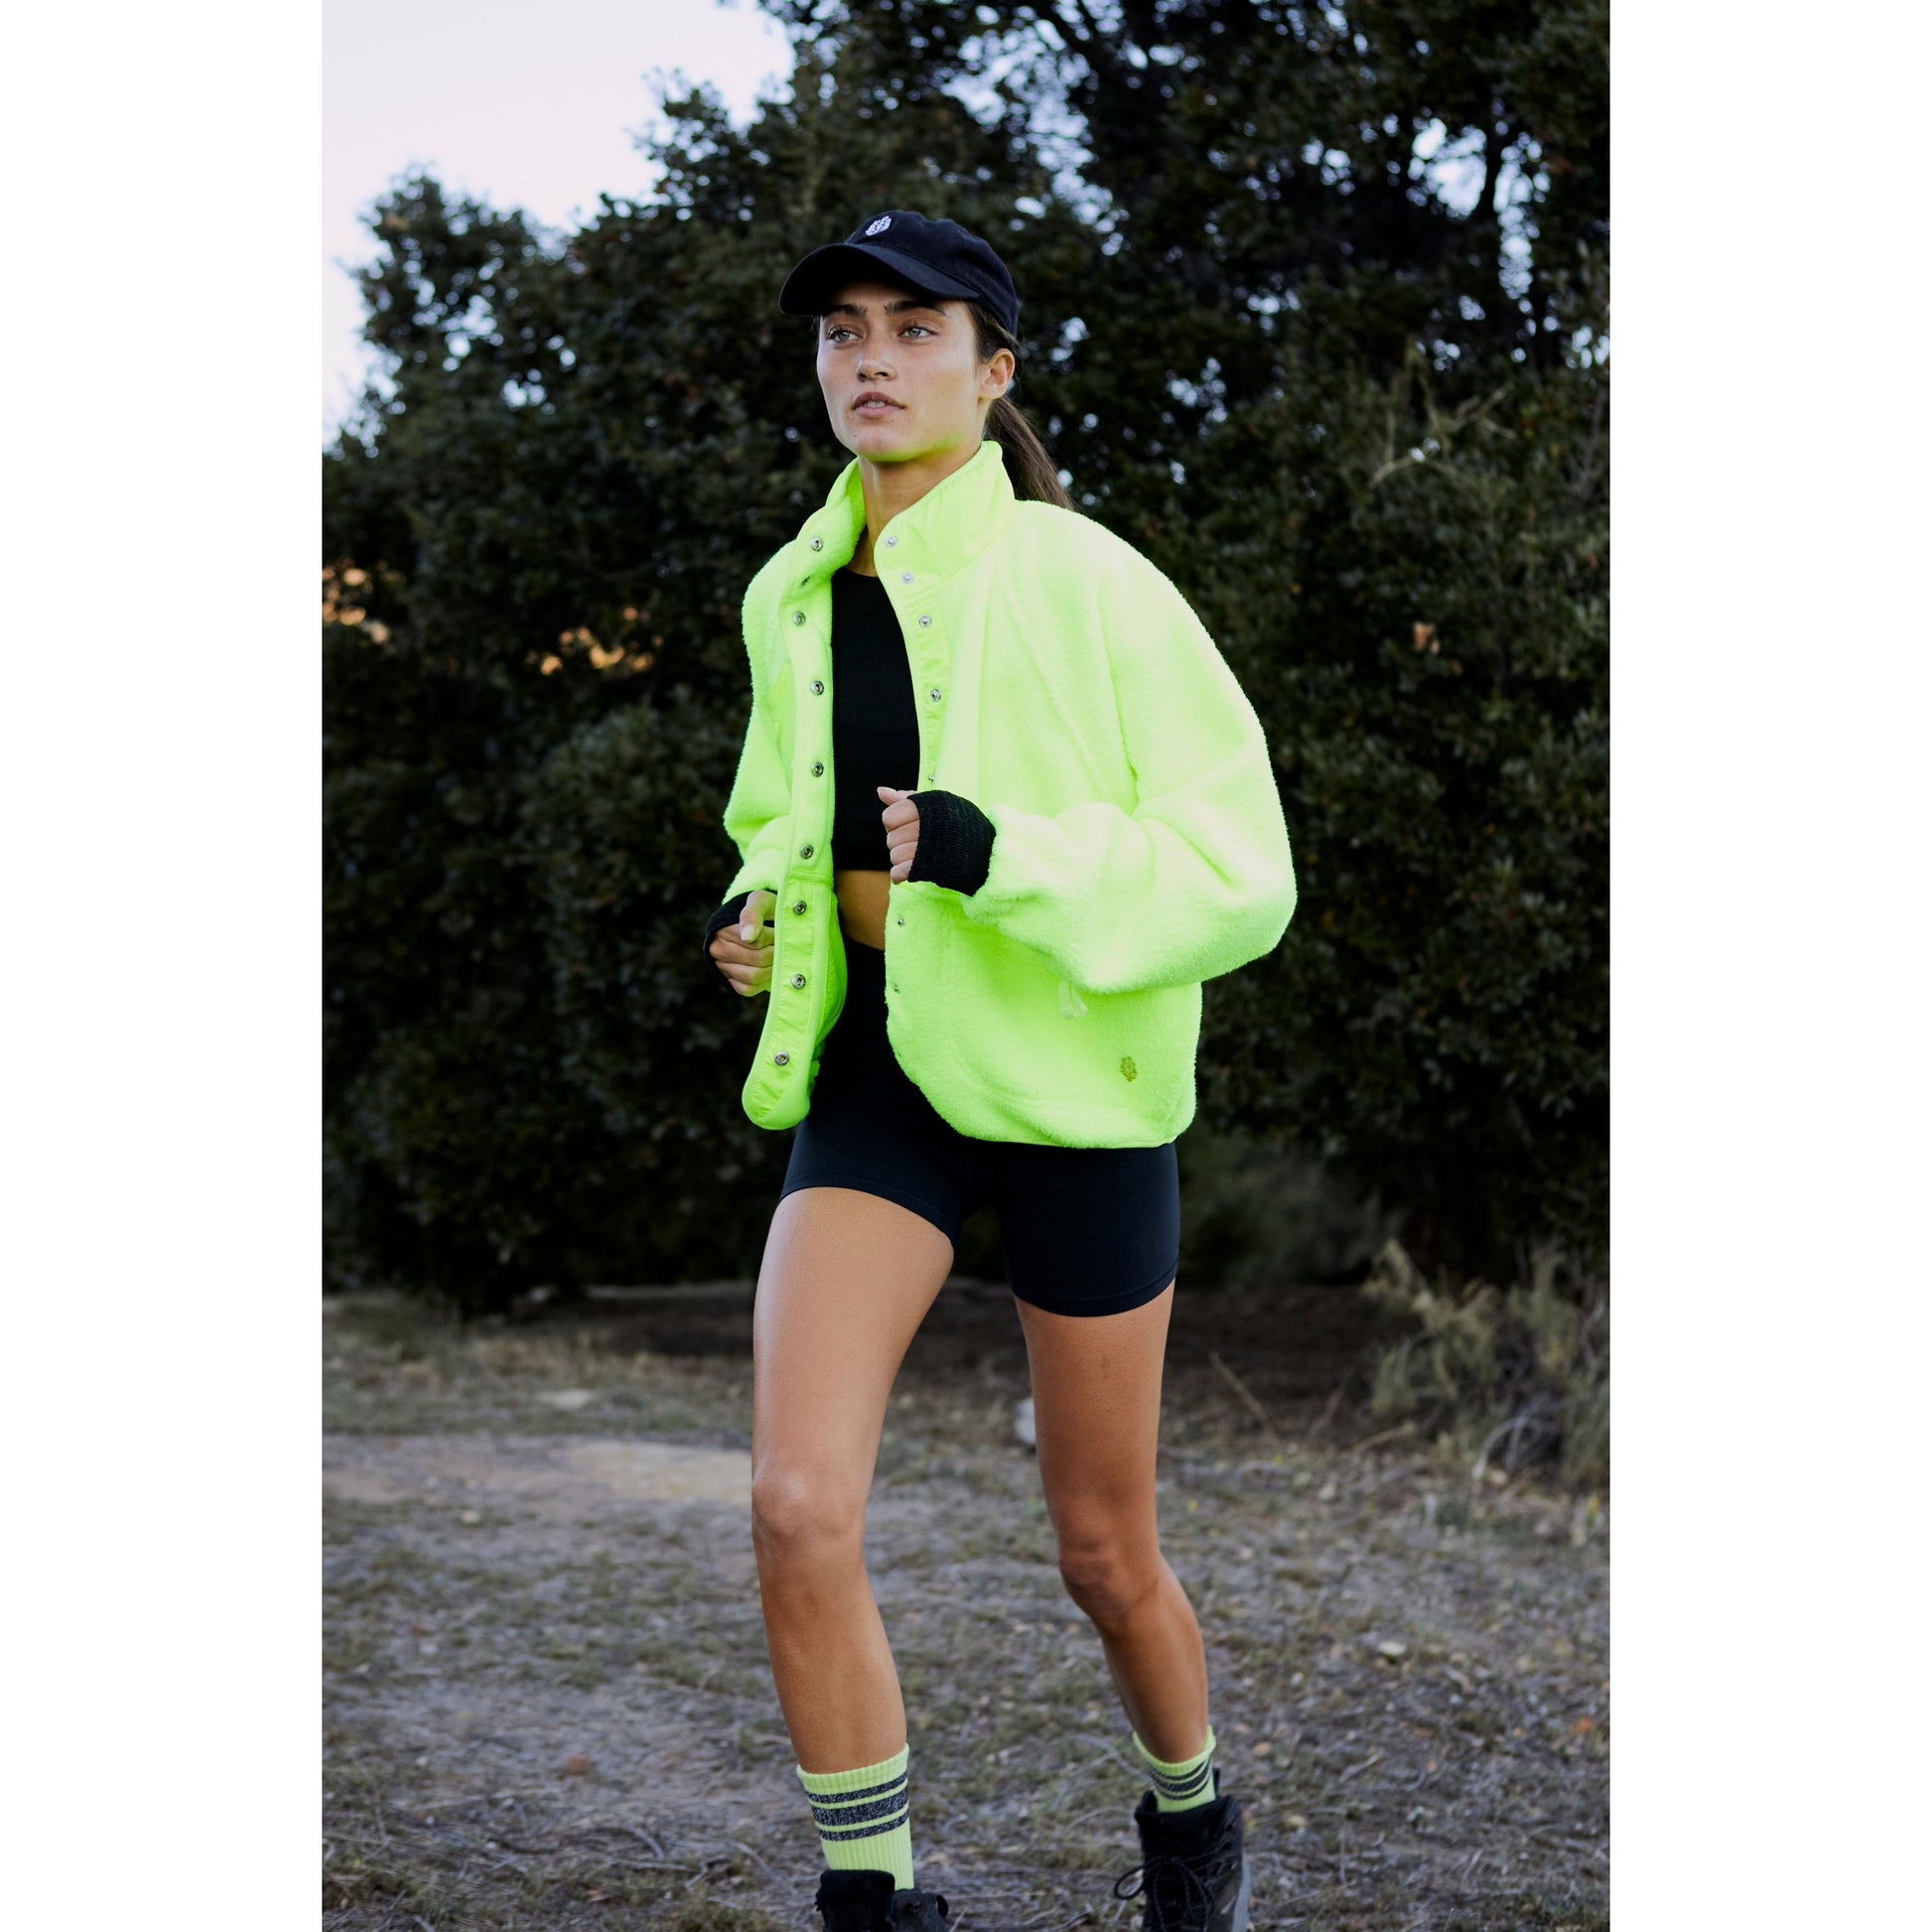 A woman in a Free People Movement Hit The Slopes Jacket in Highlighter and black shorts jogging on a trail with trees in the background.